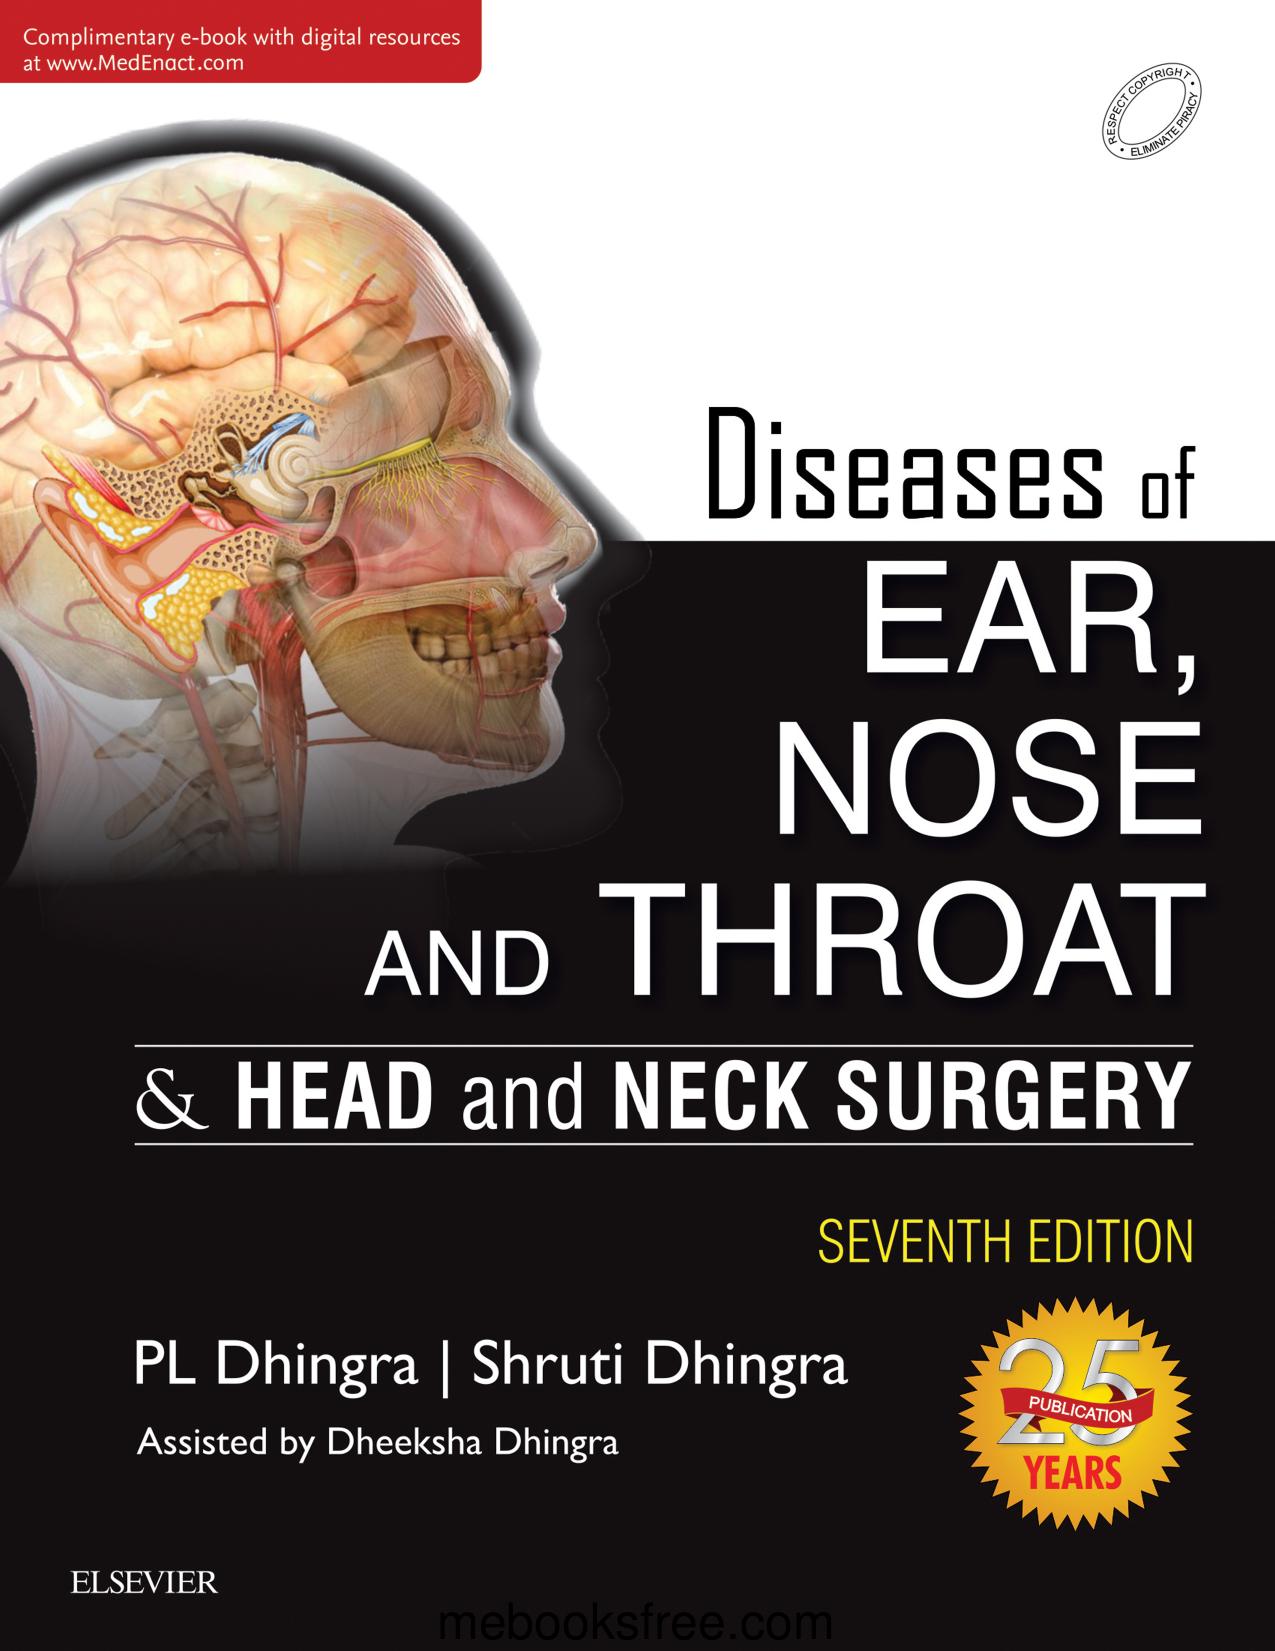 Diseases of Ear, Nose and Throat & Head and Neck Surgery 7th ed 2018